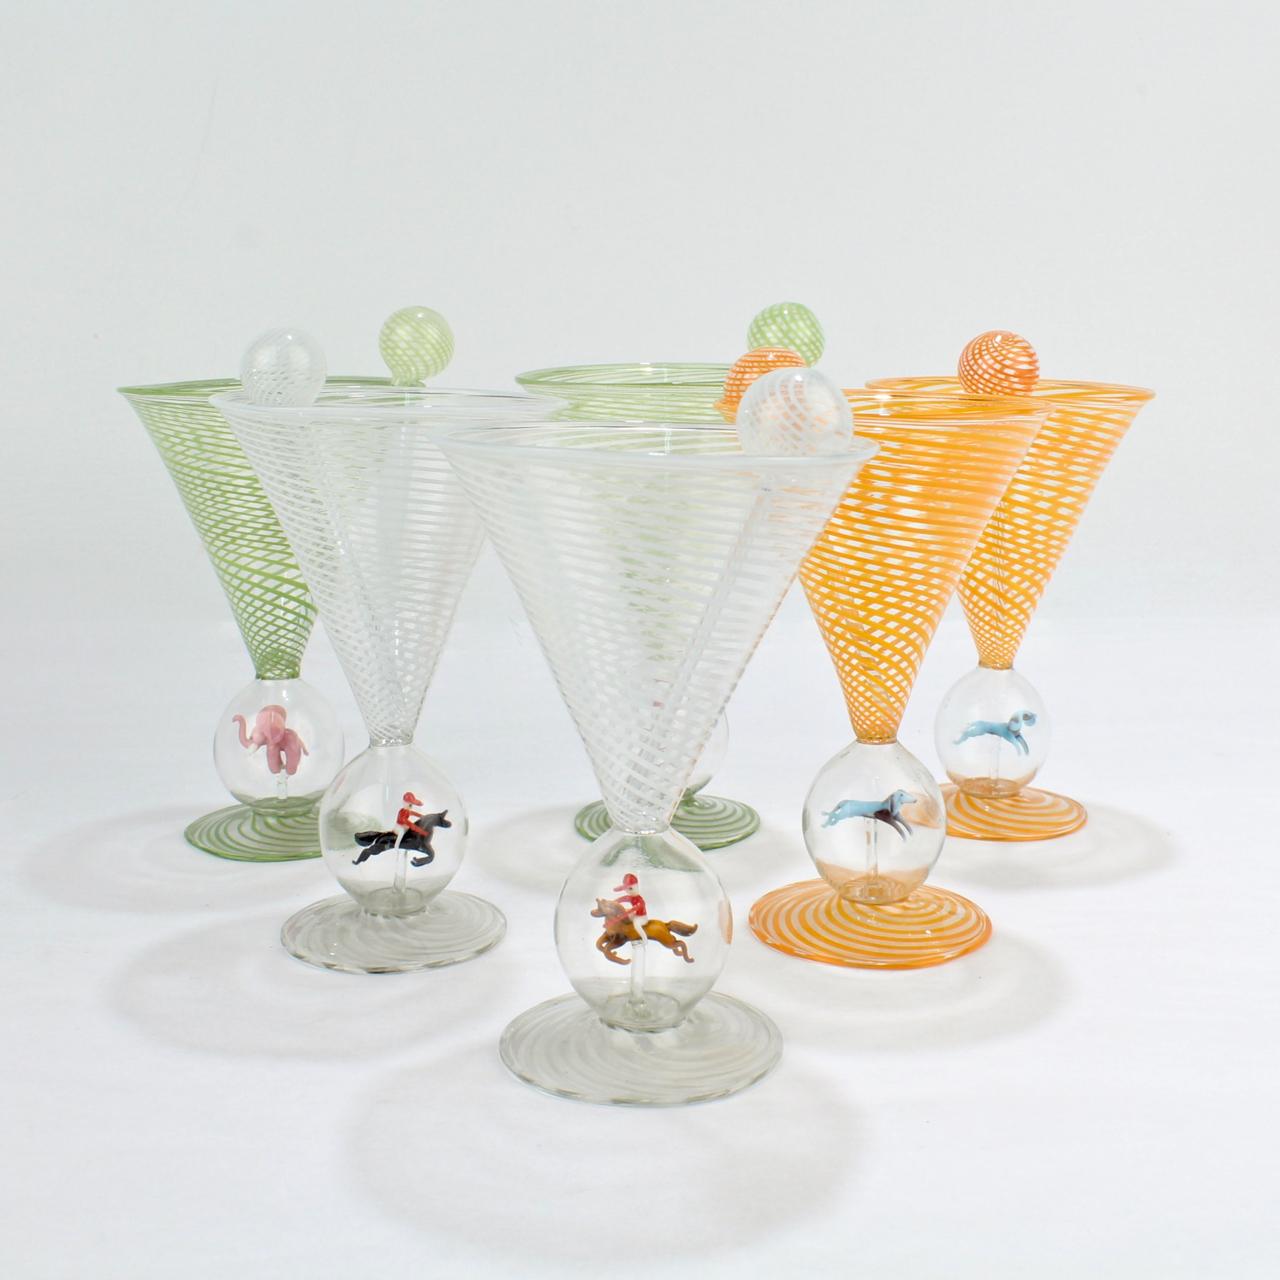 A set of 6 fine Bimini type martini or cocktail glasses.

Each glass is designed in the Art Deco style and has a fine lamp work figure enclosed in its stem. In this set, there are 2 examples of a dog, an elephant, and a horse and jockey.

Each